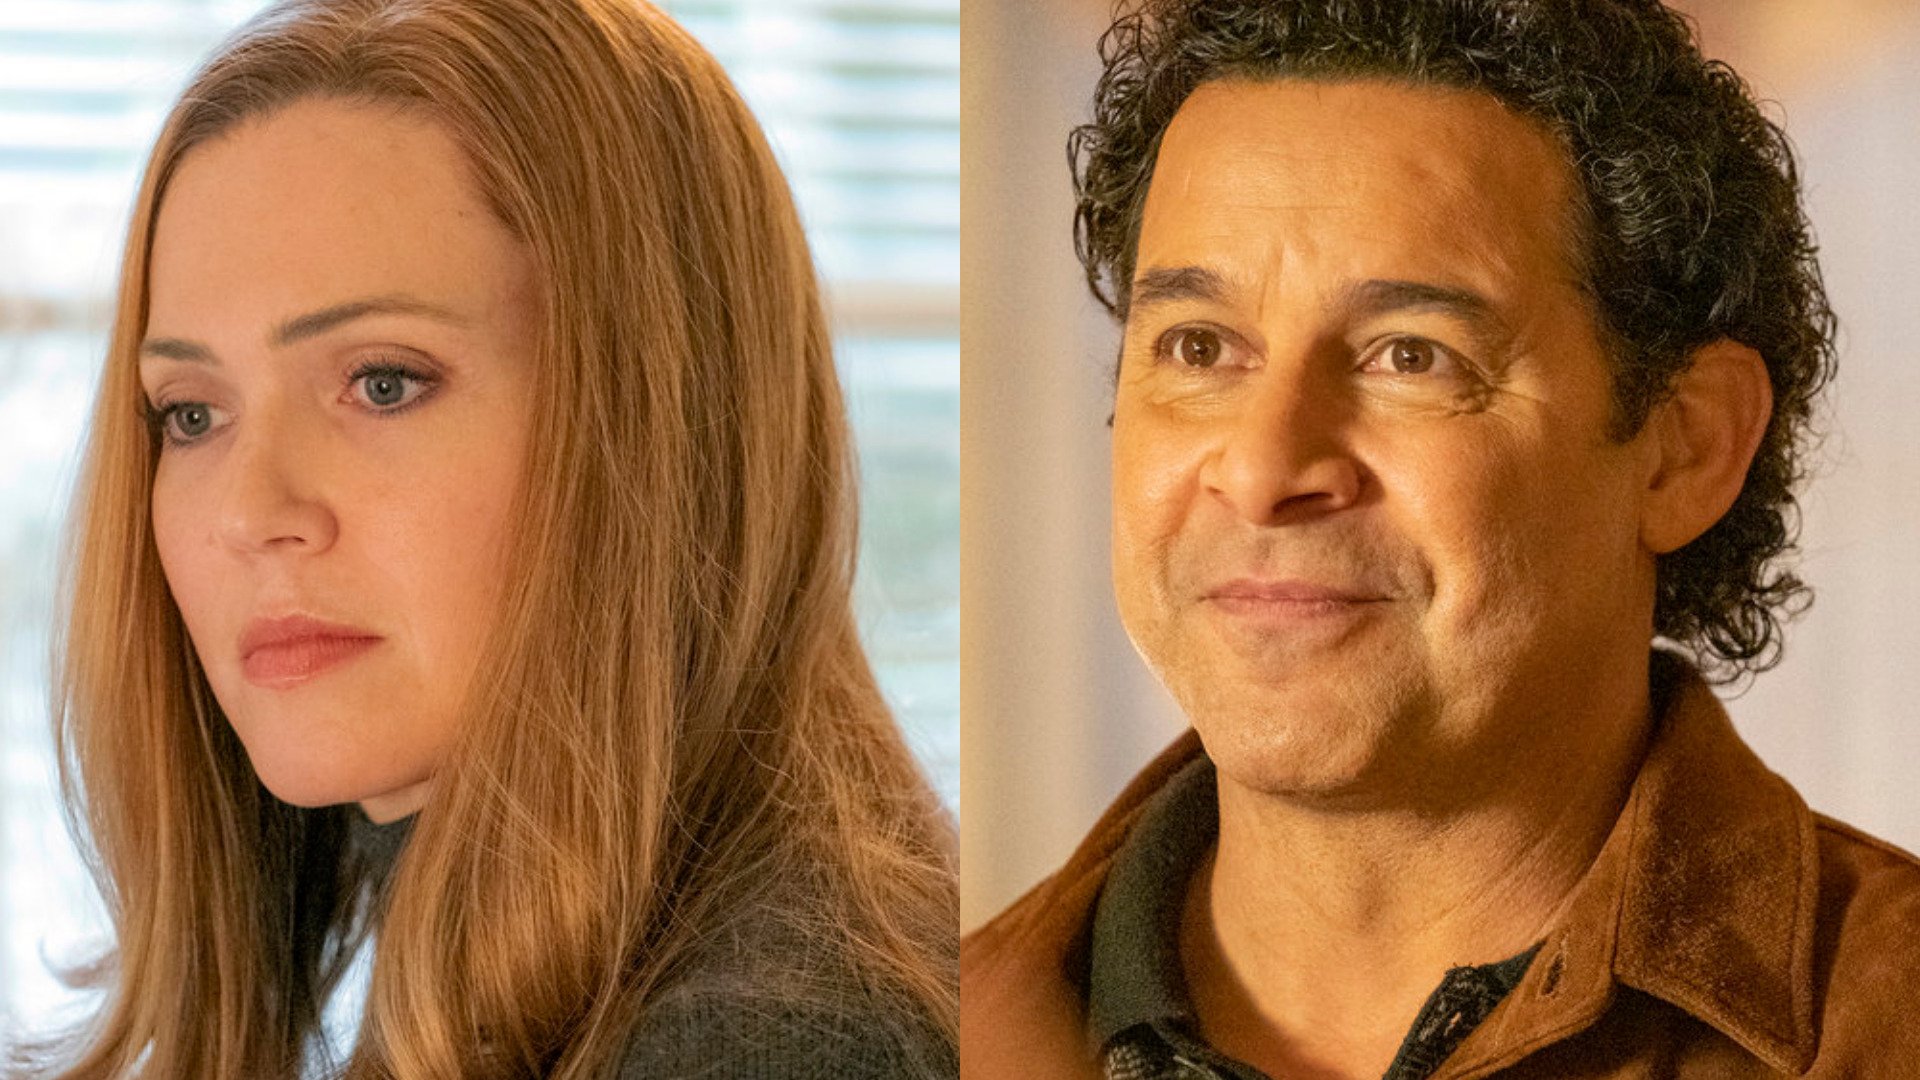 Headshots of Mandy Moore as Rebecca and Jon Huertas as Miguel in ‘This Is Us’ 6x06